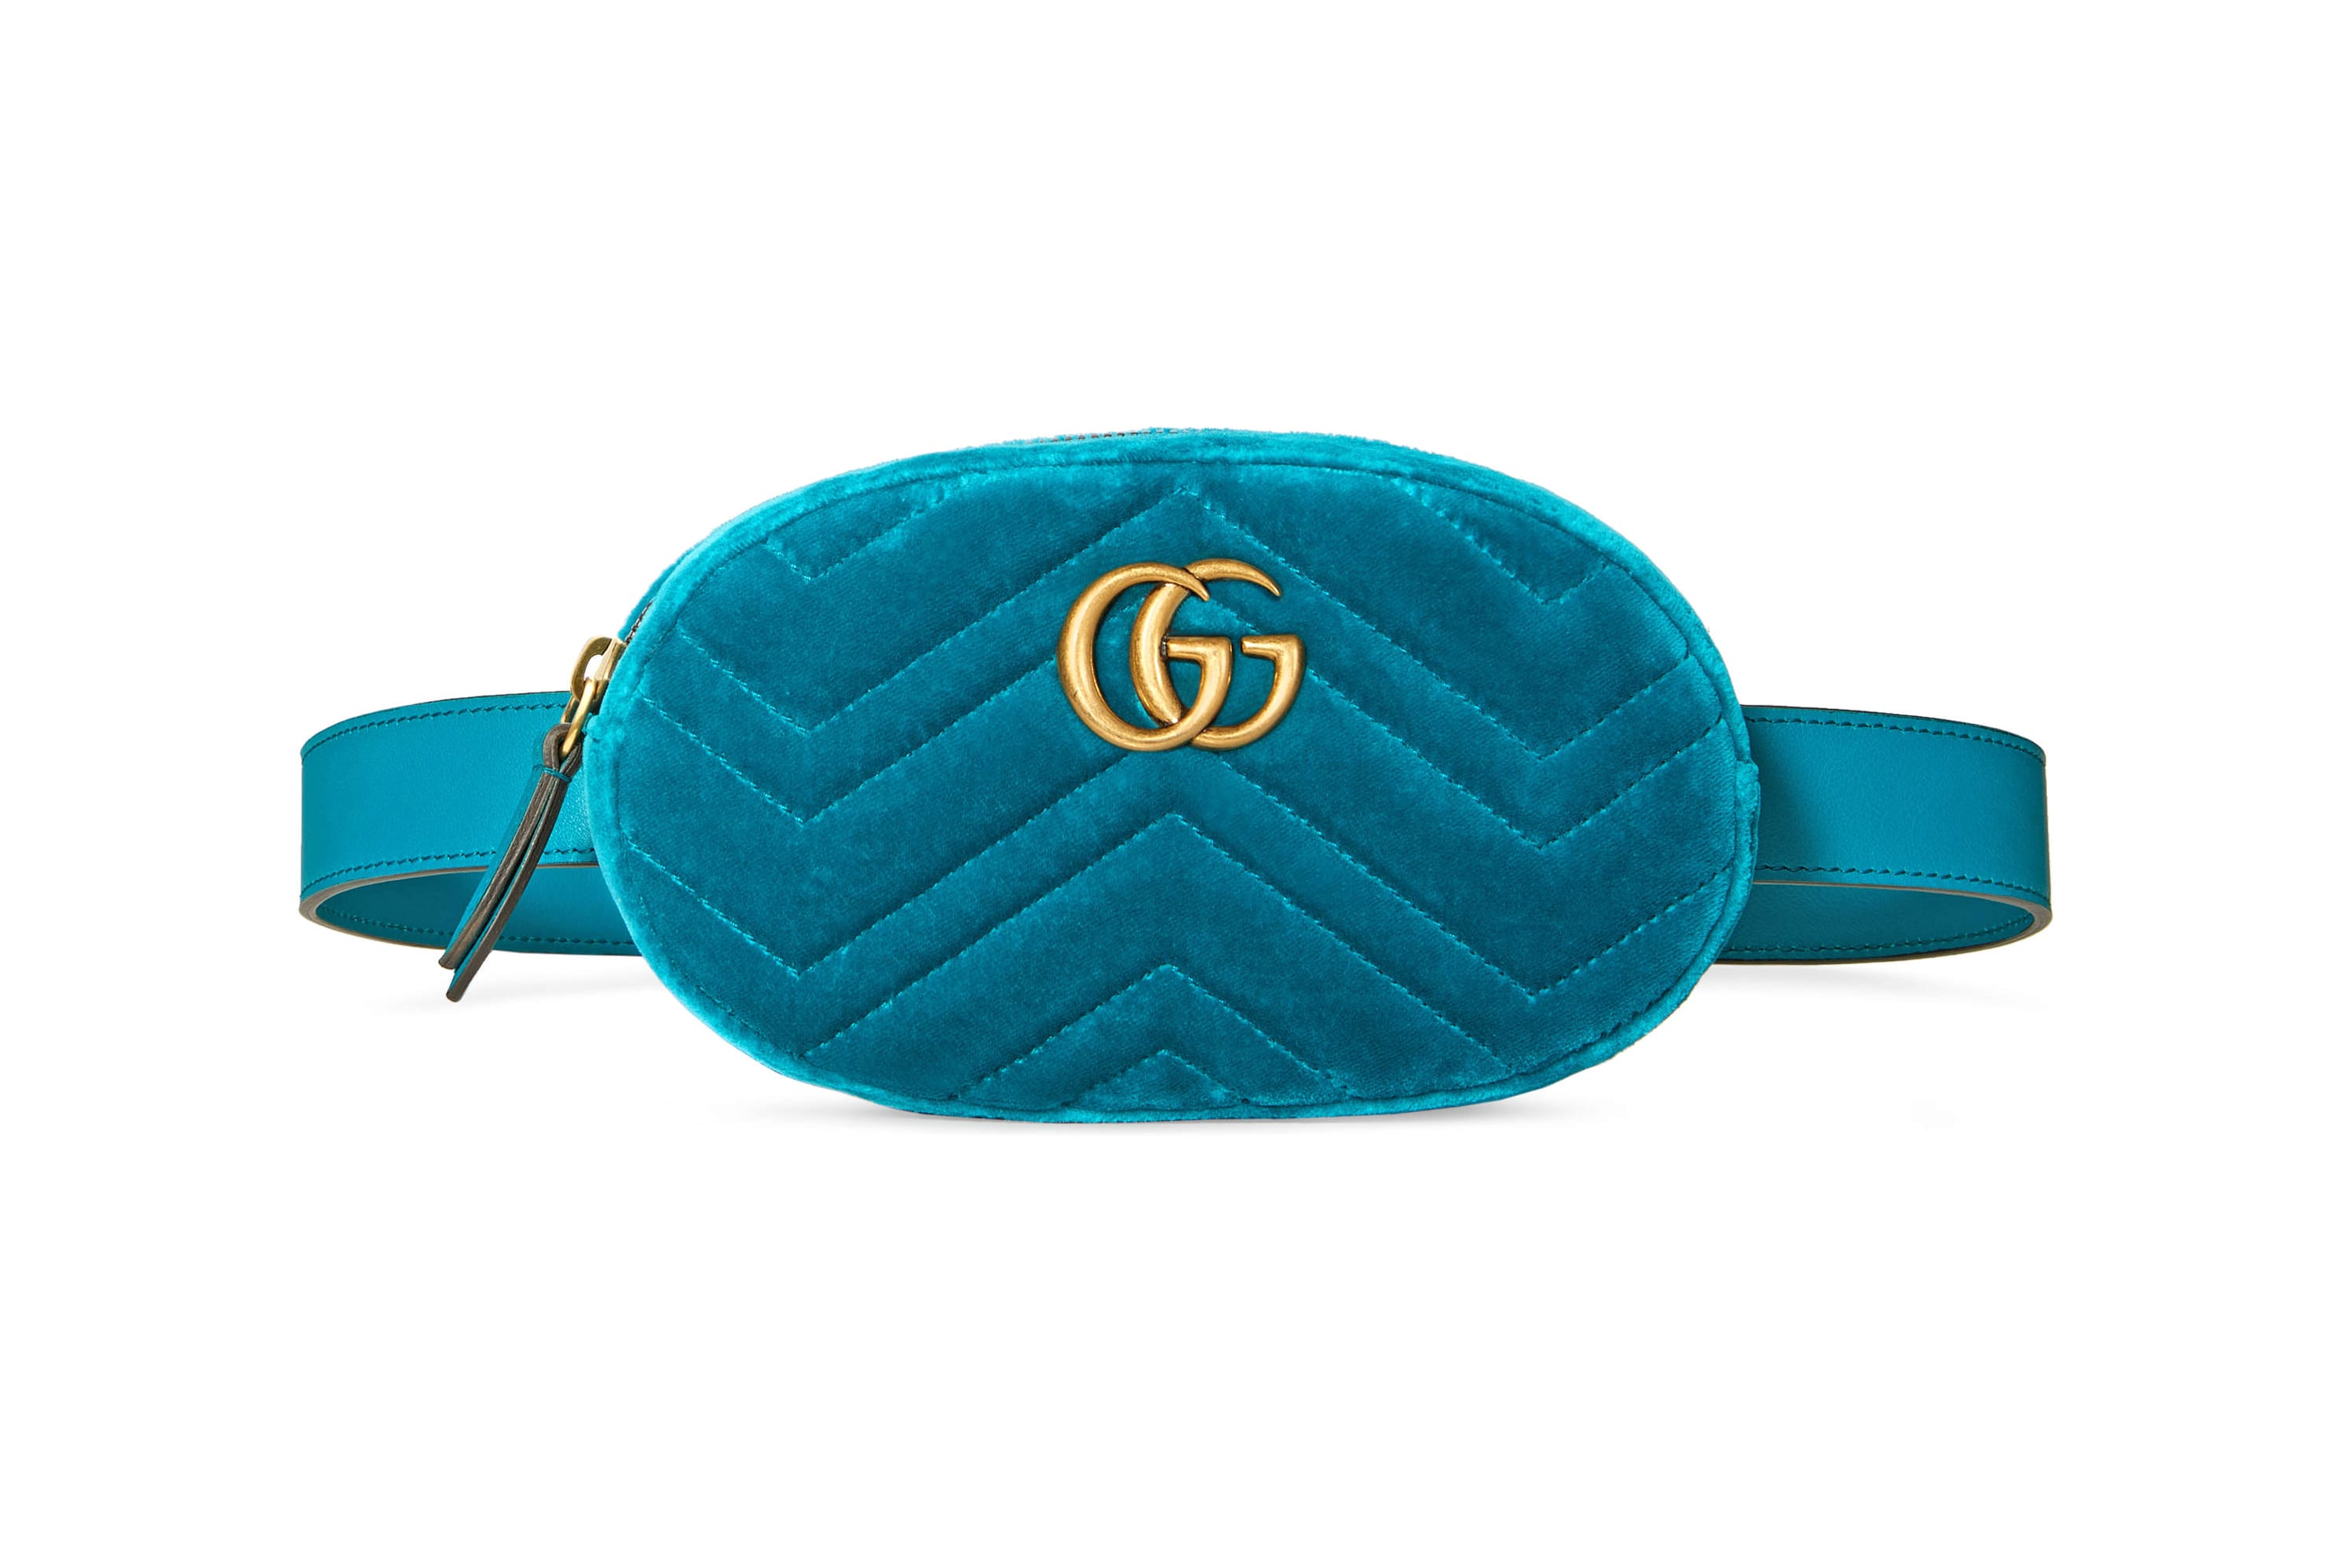 Gucci Marmont Belt Bag Is Covered in 